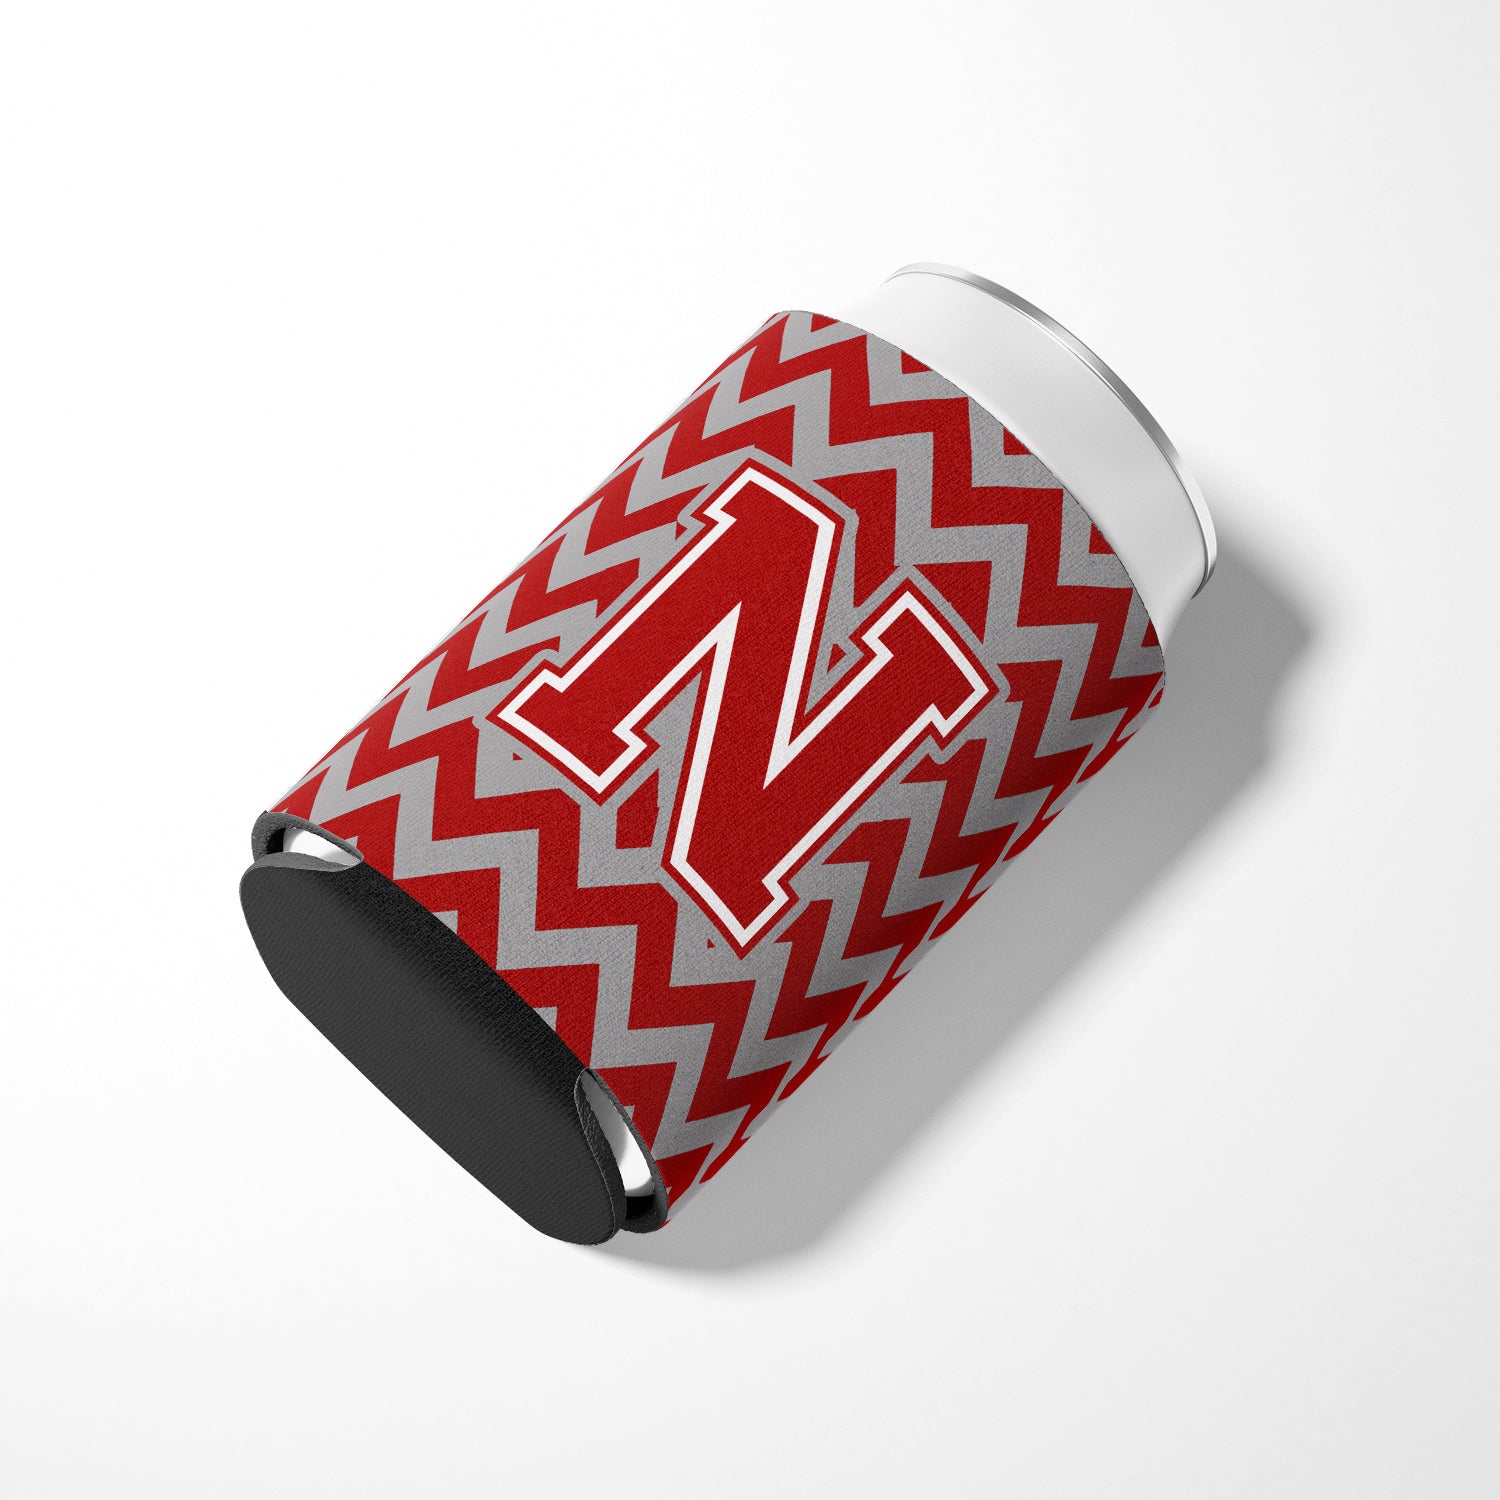 Letter N Chevron Maroon and White Can or Bottle Hugger CJ1049-NCC.